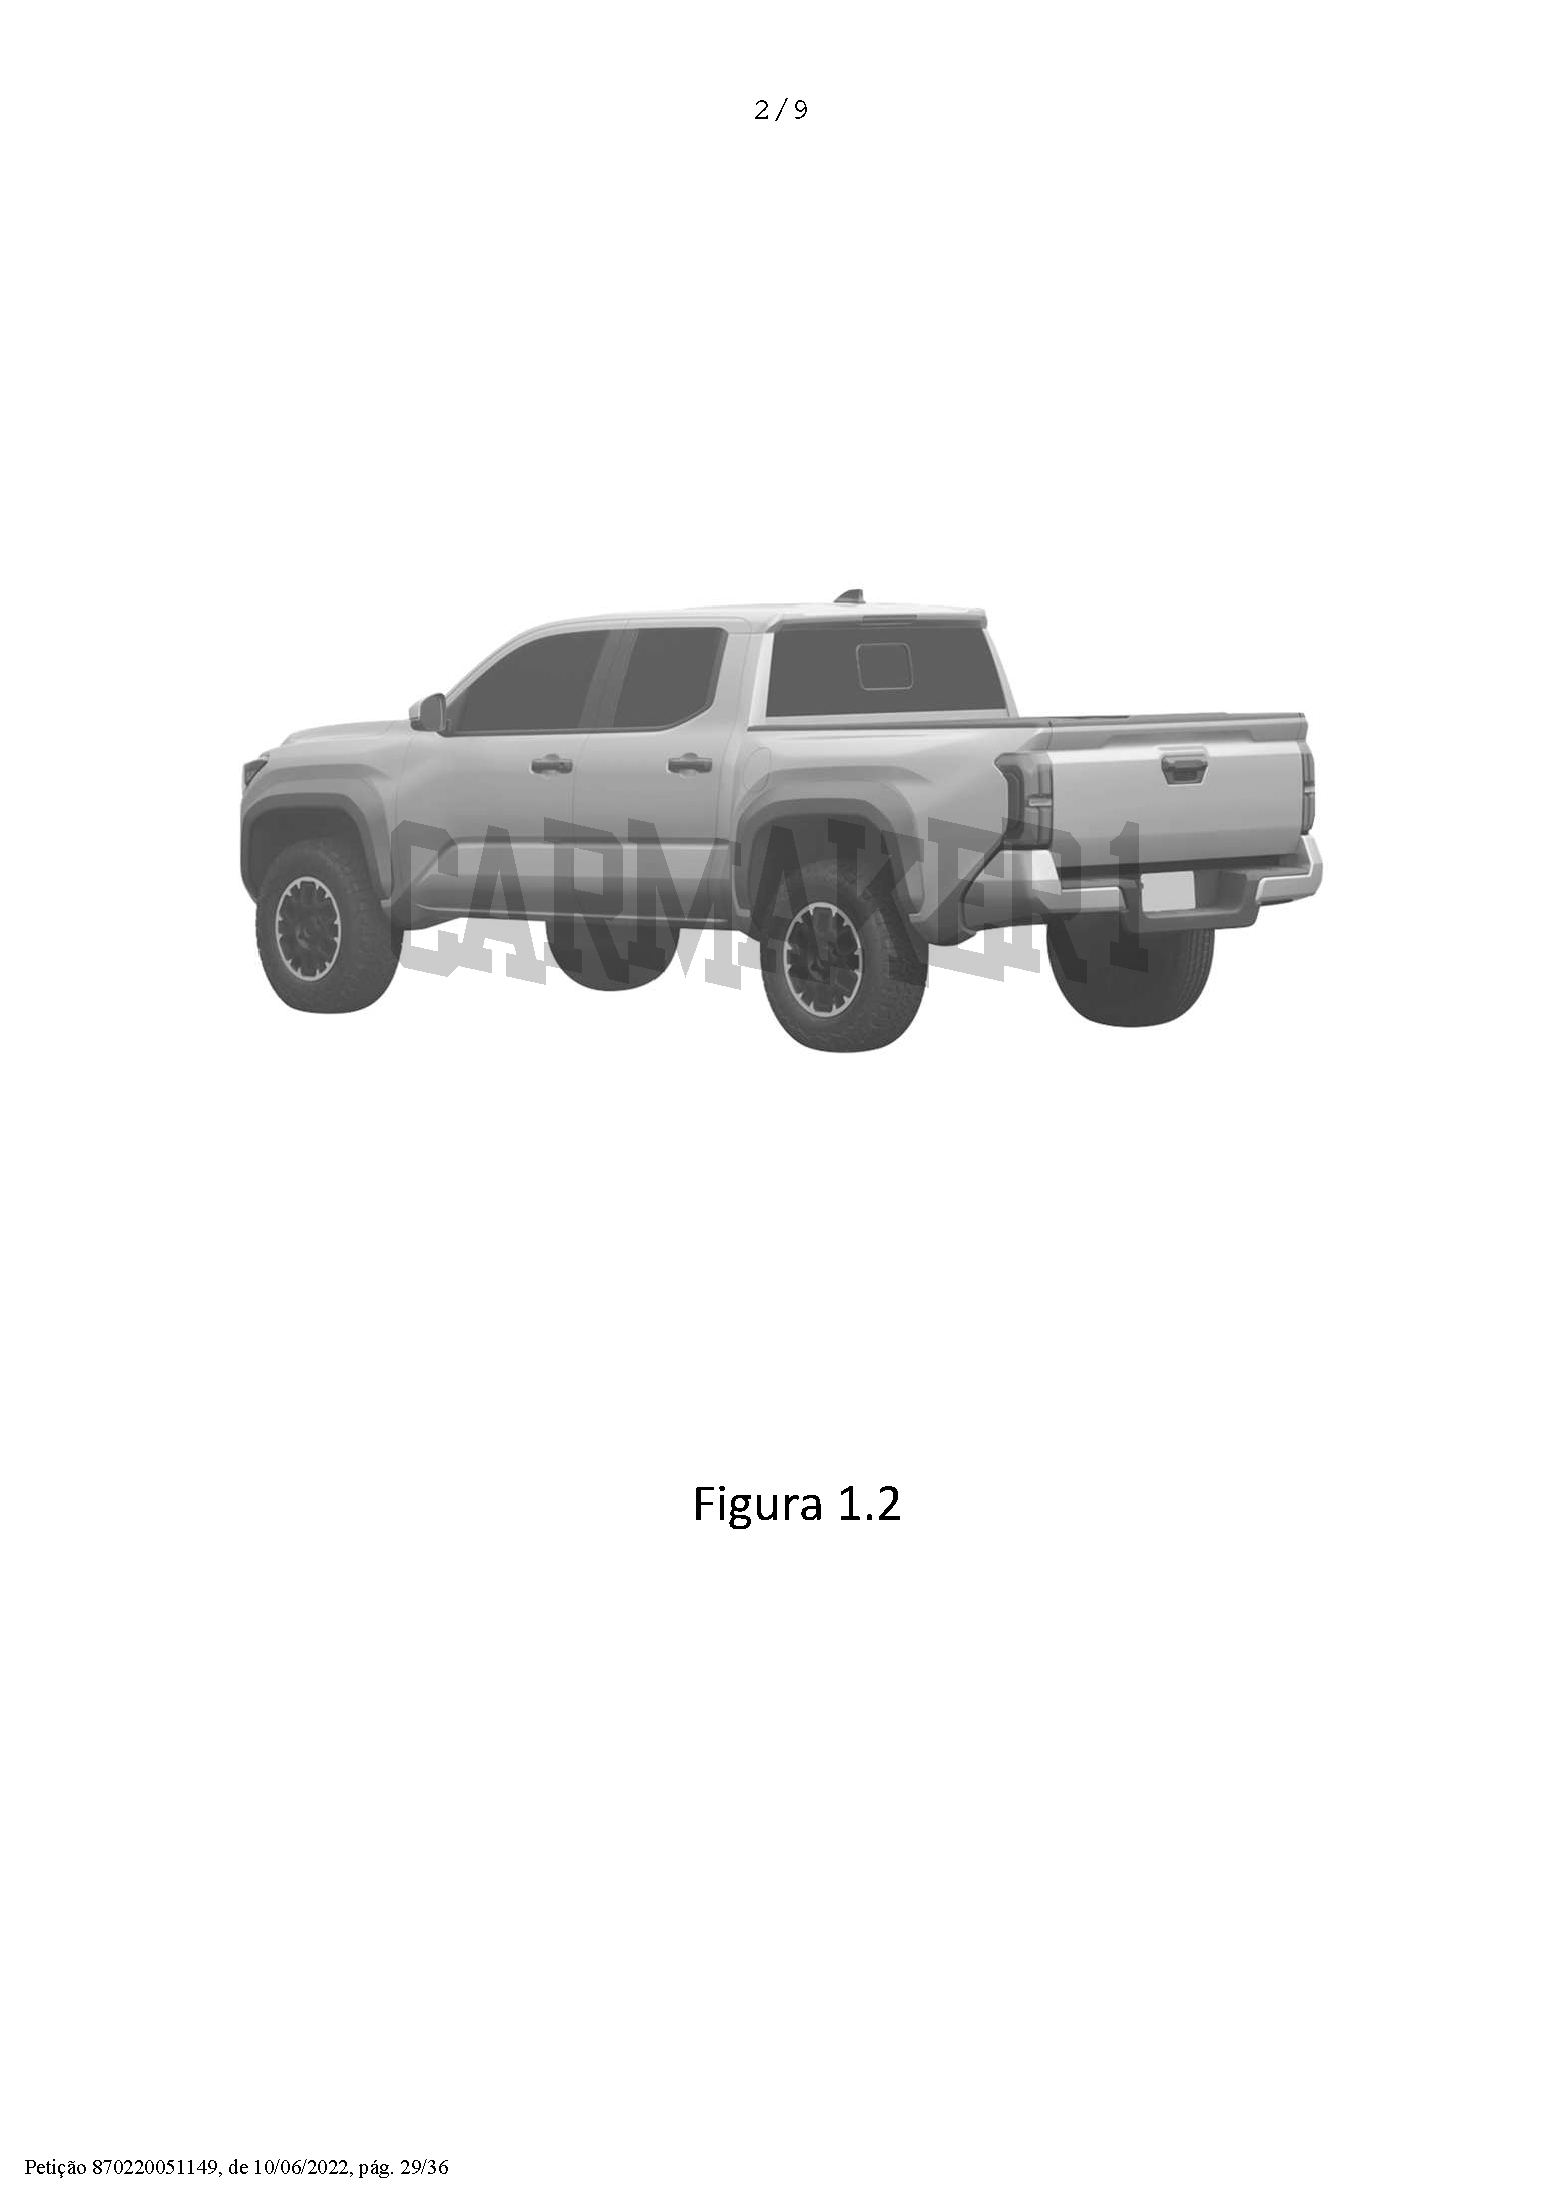 2024 Tacoma 2024 Tacoma Design Images Revealed in Patent! 📸 🕵🏻‍♂️ 302022003011_Page_05